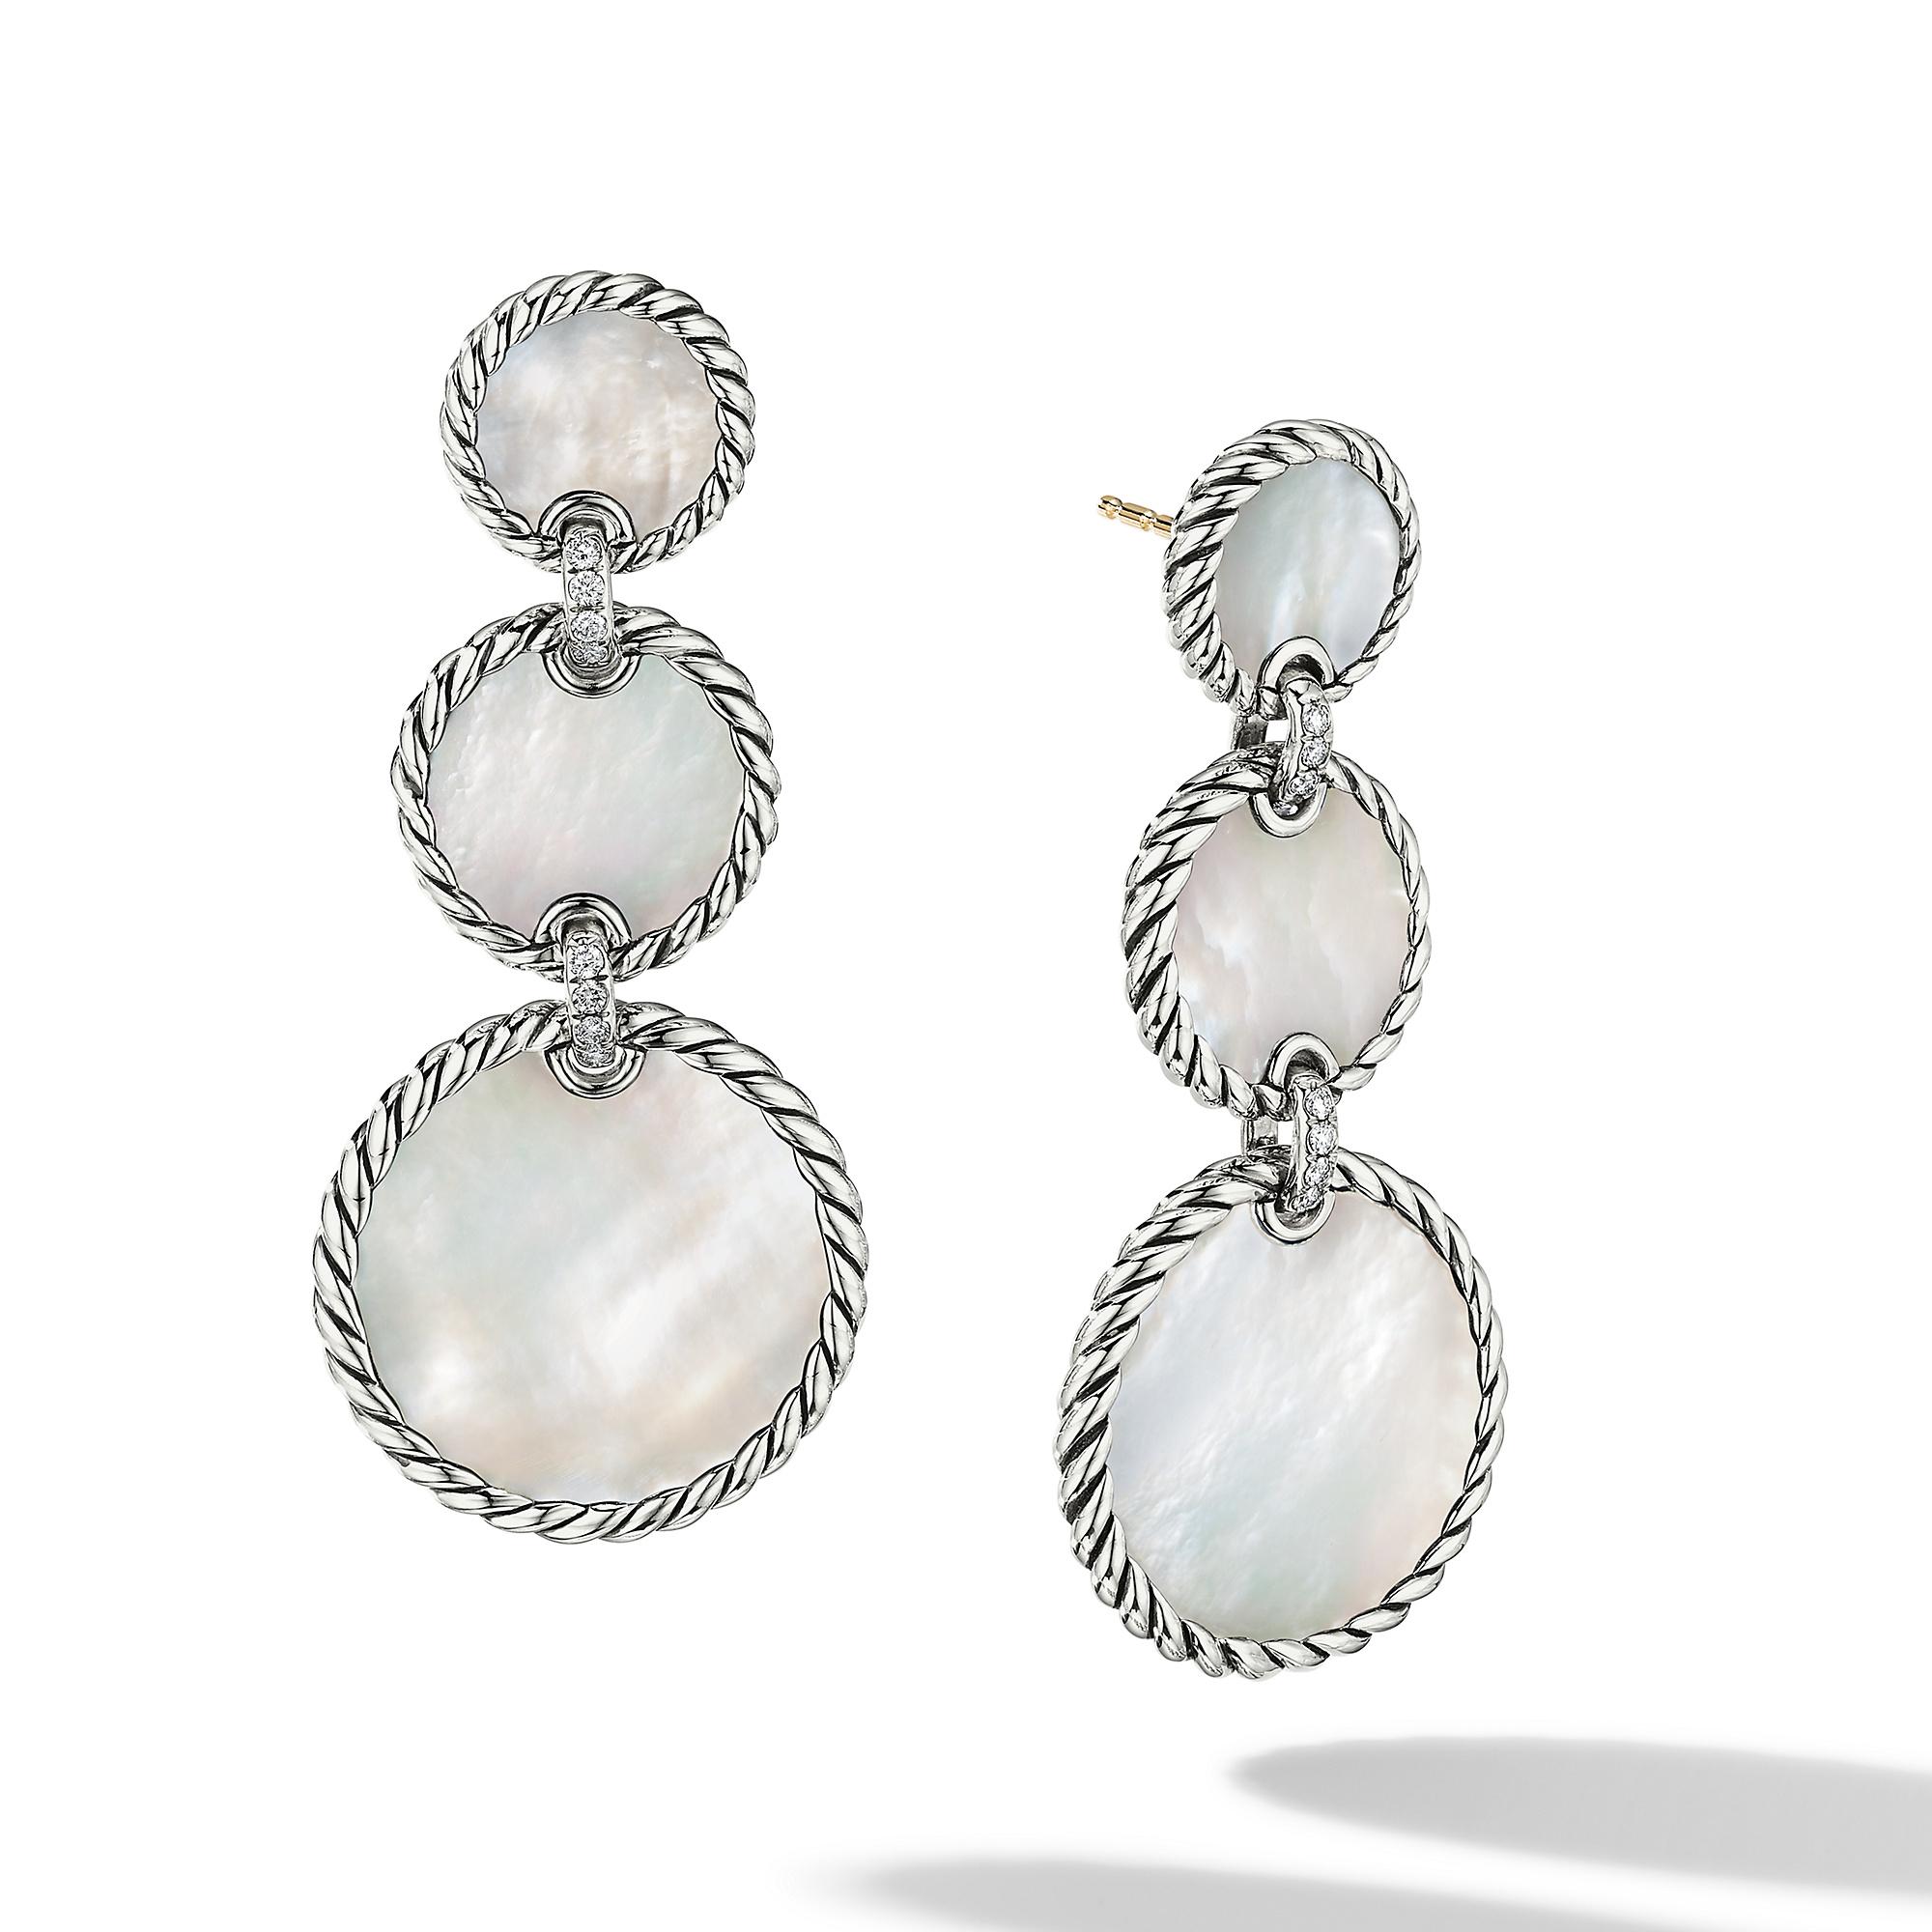 David Yurman DY Elements Triple Drop Earrings with Mother Of Pearl and Pave Diamonds